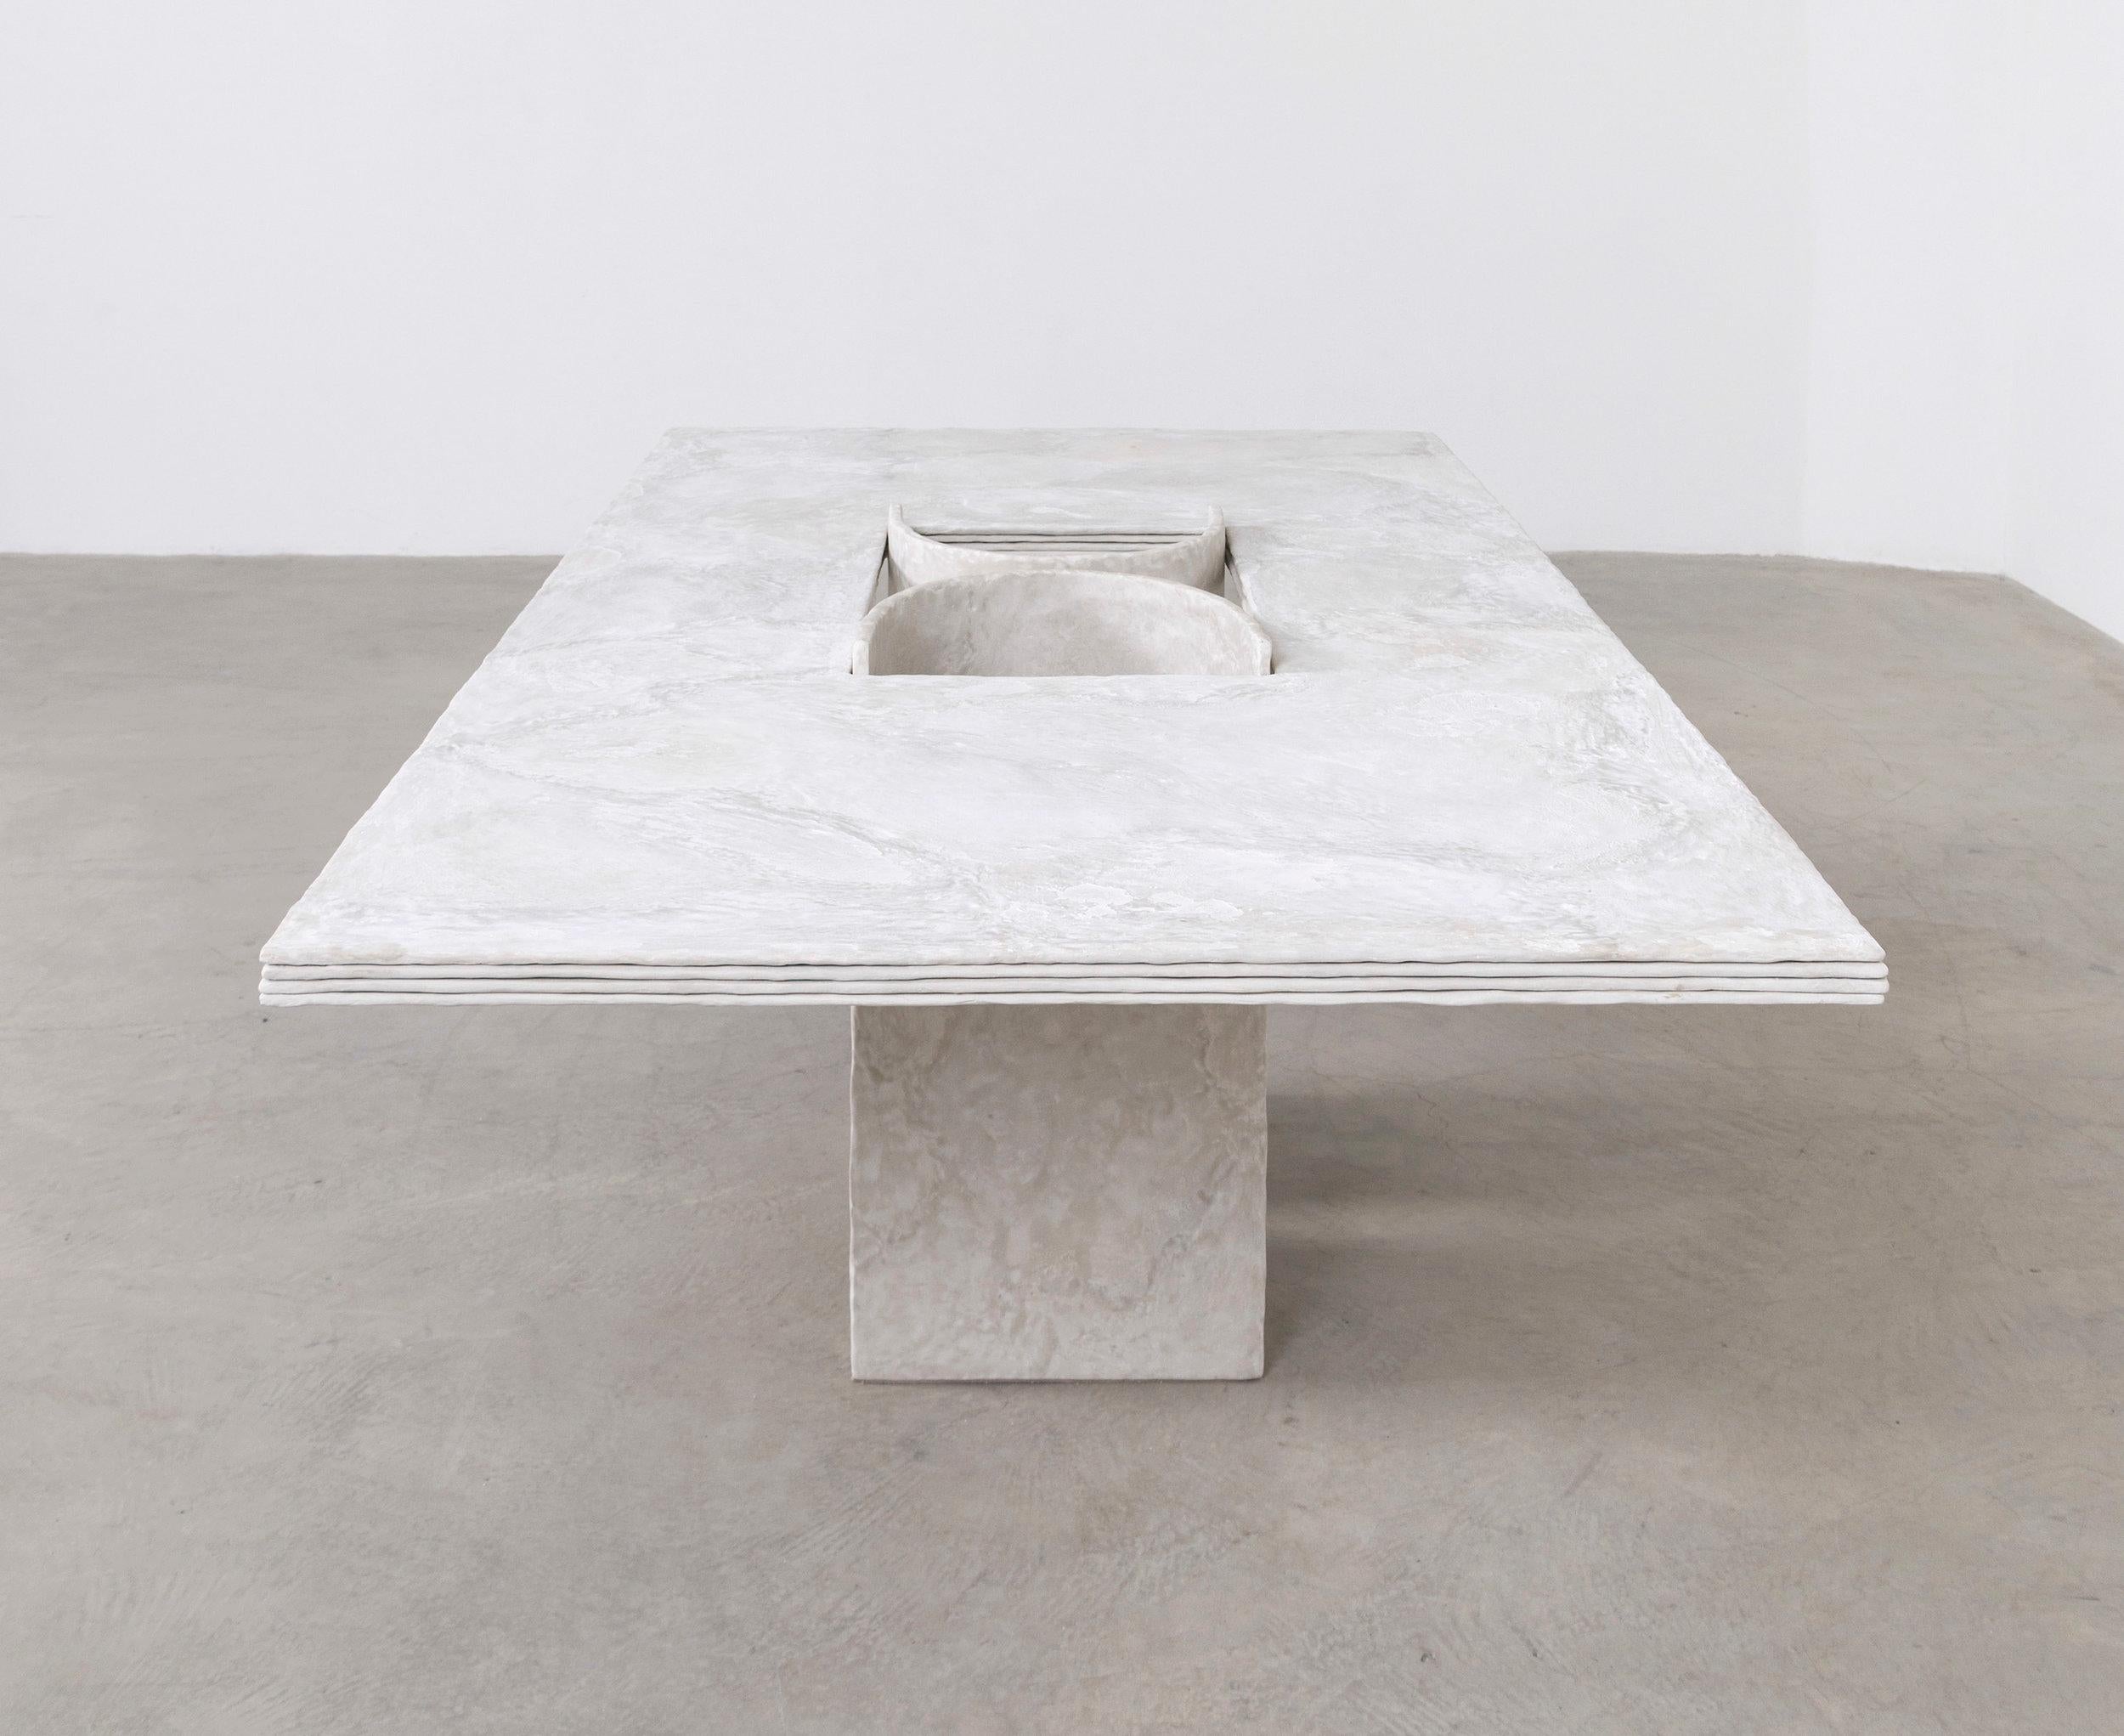 American Plane Dining Table in Cement by Bailey Fontaine, Represented by Tuleste Factory